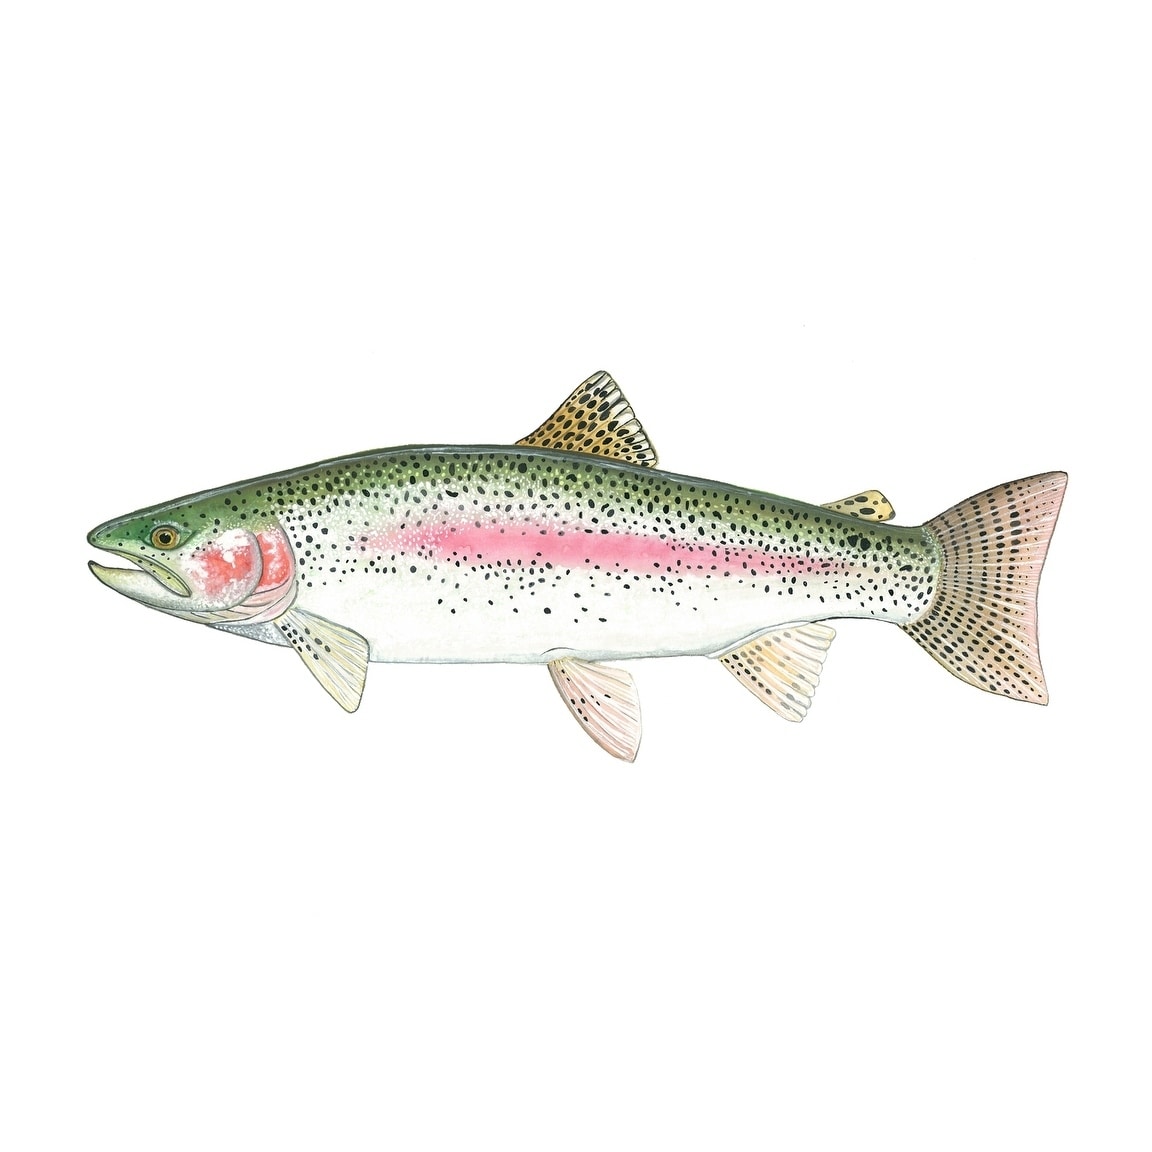 CANVAS Rainbow Trout by Damon Crook - Bed Bath & Beyond - 29168204